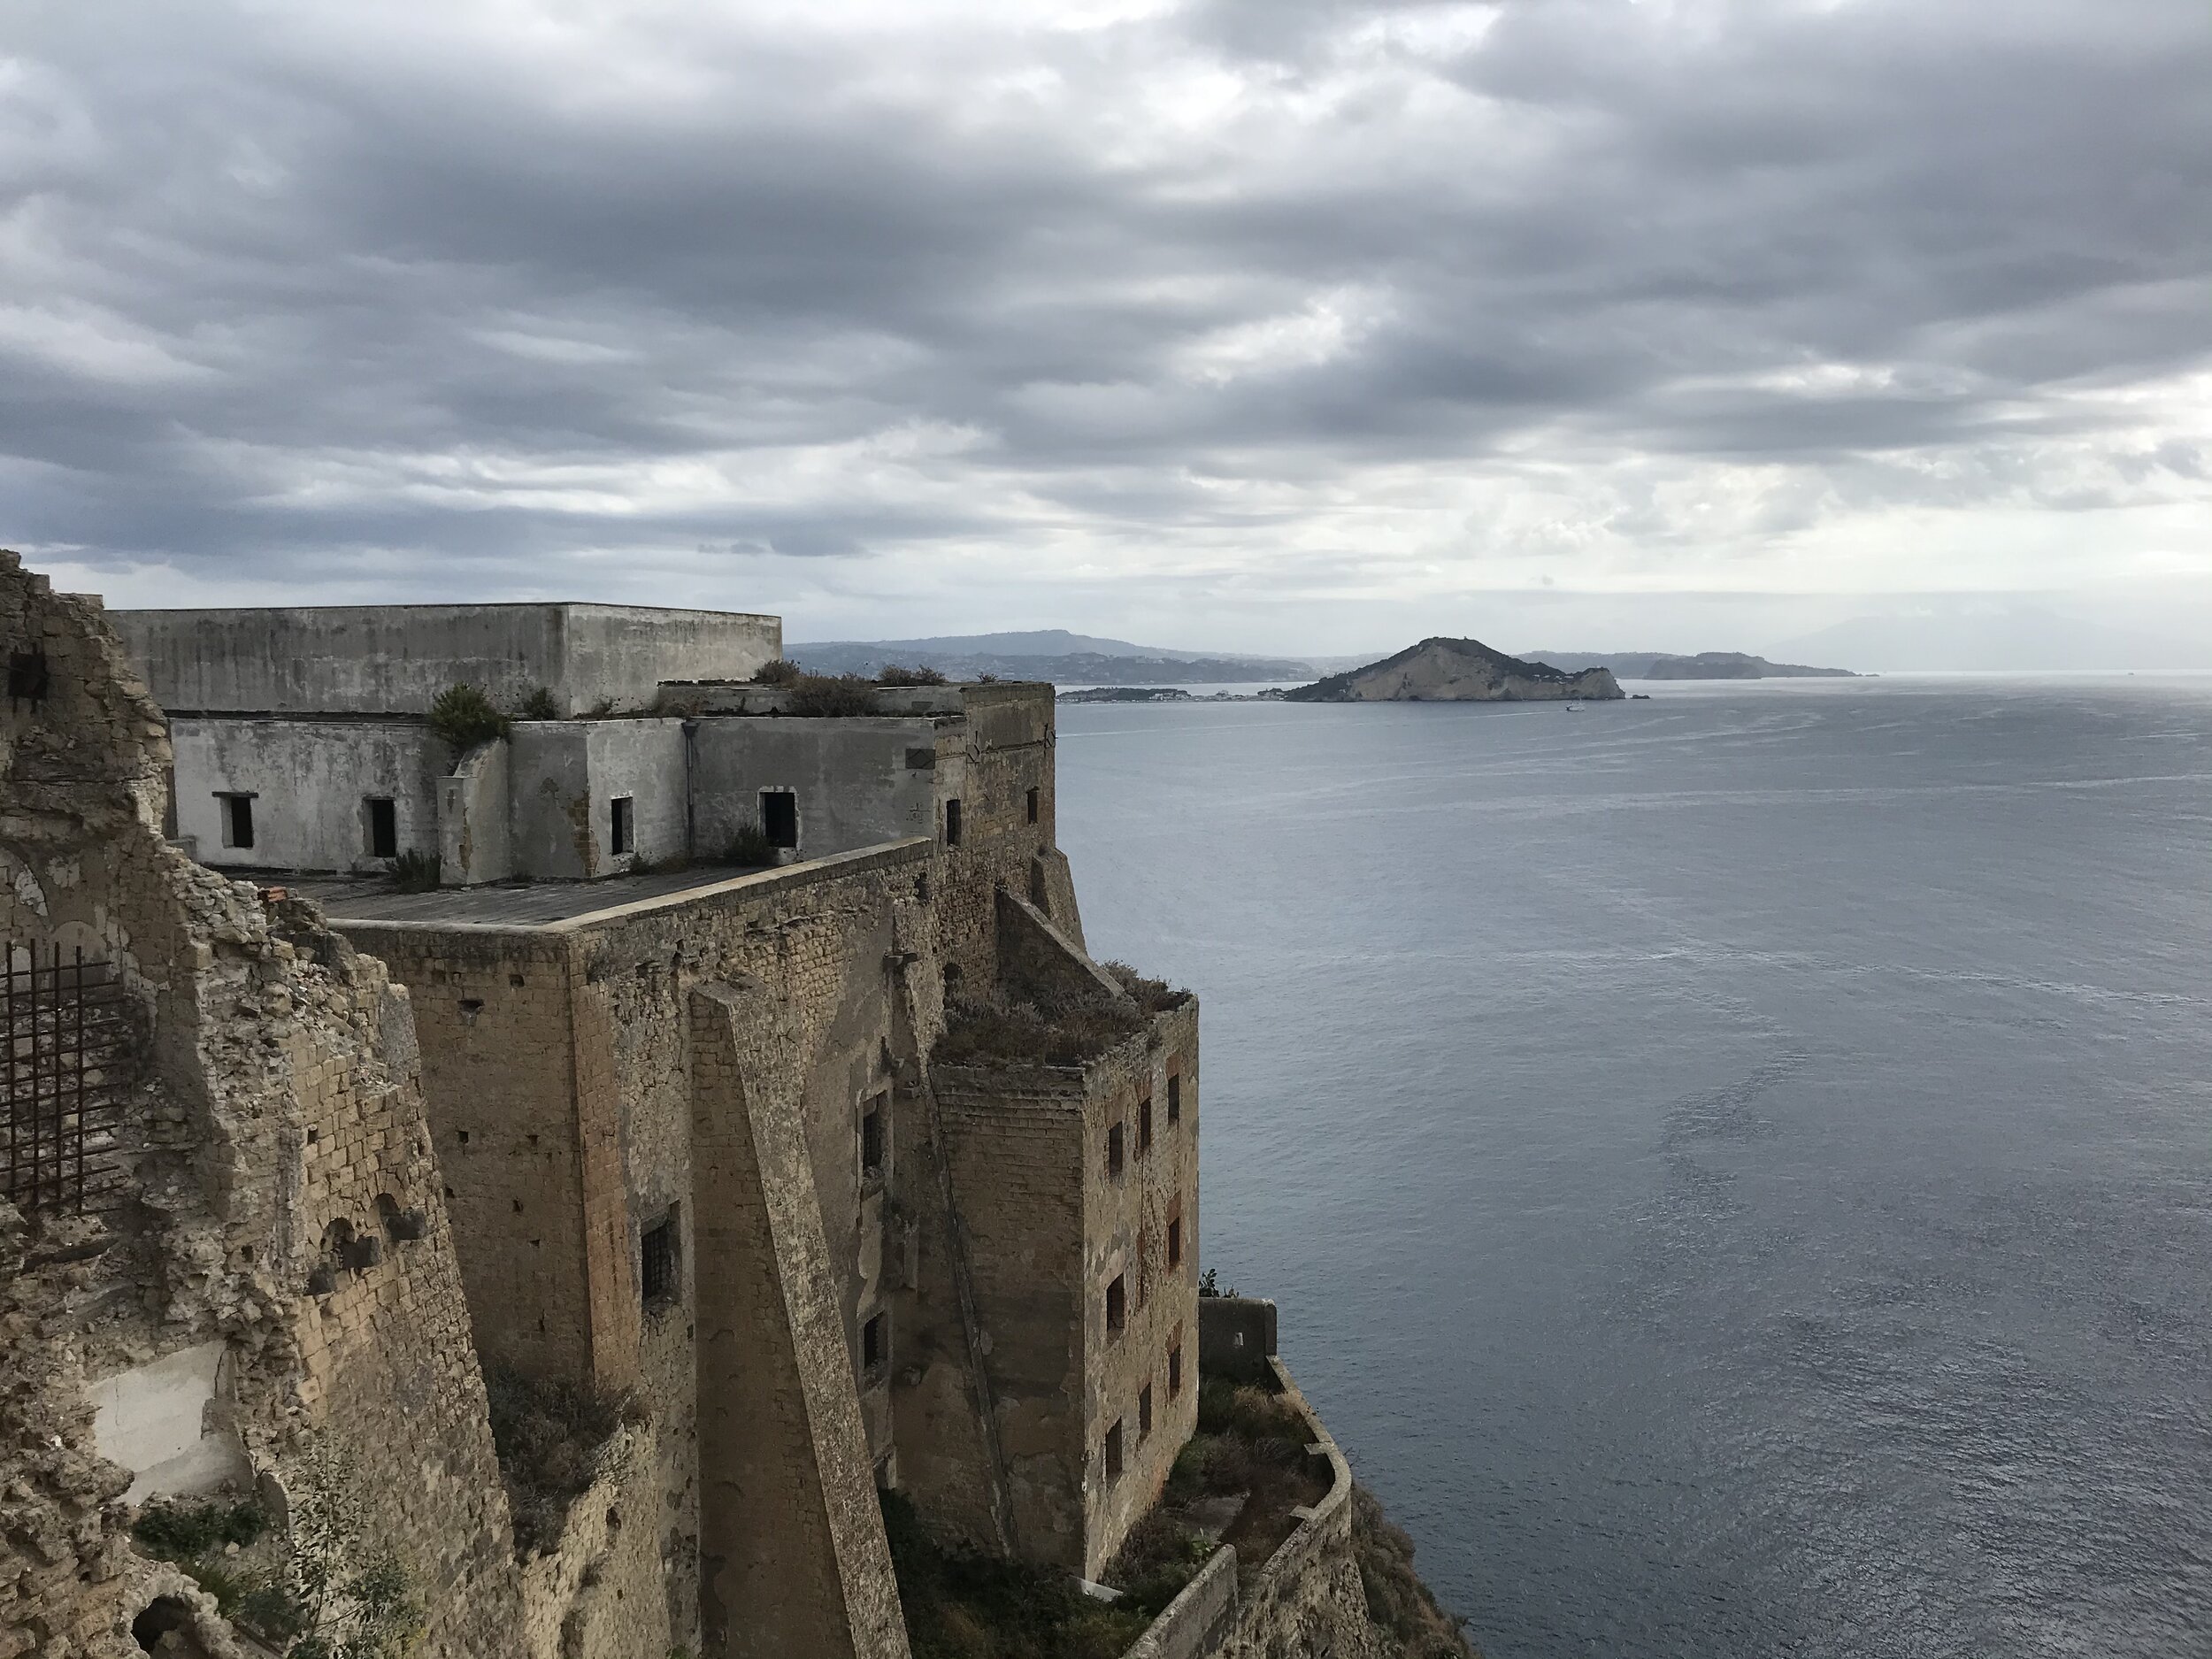  PROCIDA, Napoli. August 5th, 2020. PICTURED: The view from the terrace on top of the prison complex surrounded by relatively new real estate. 